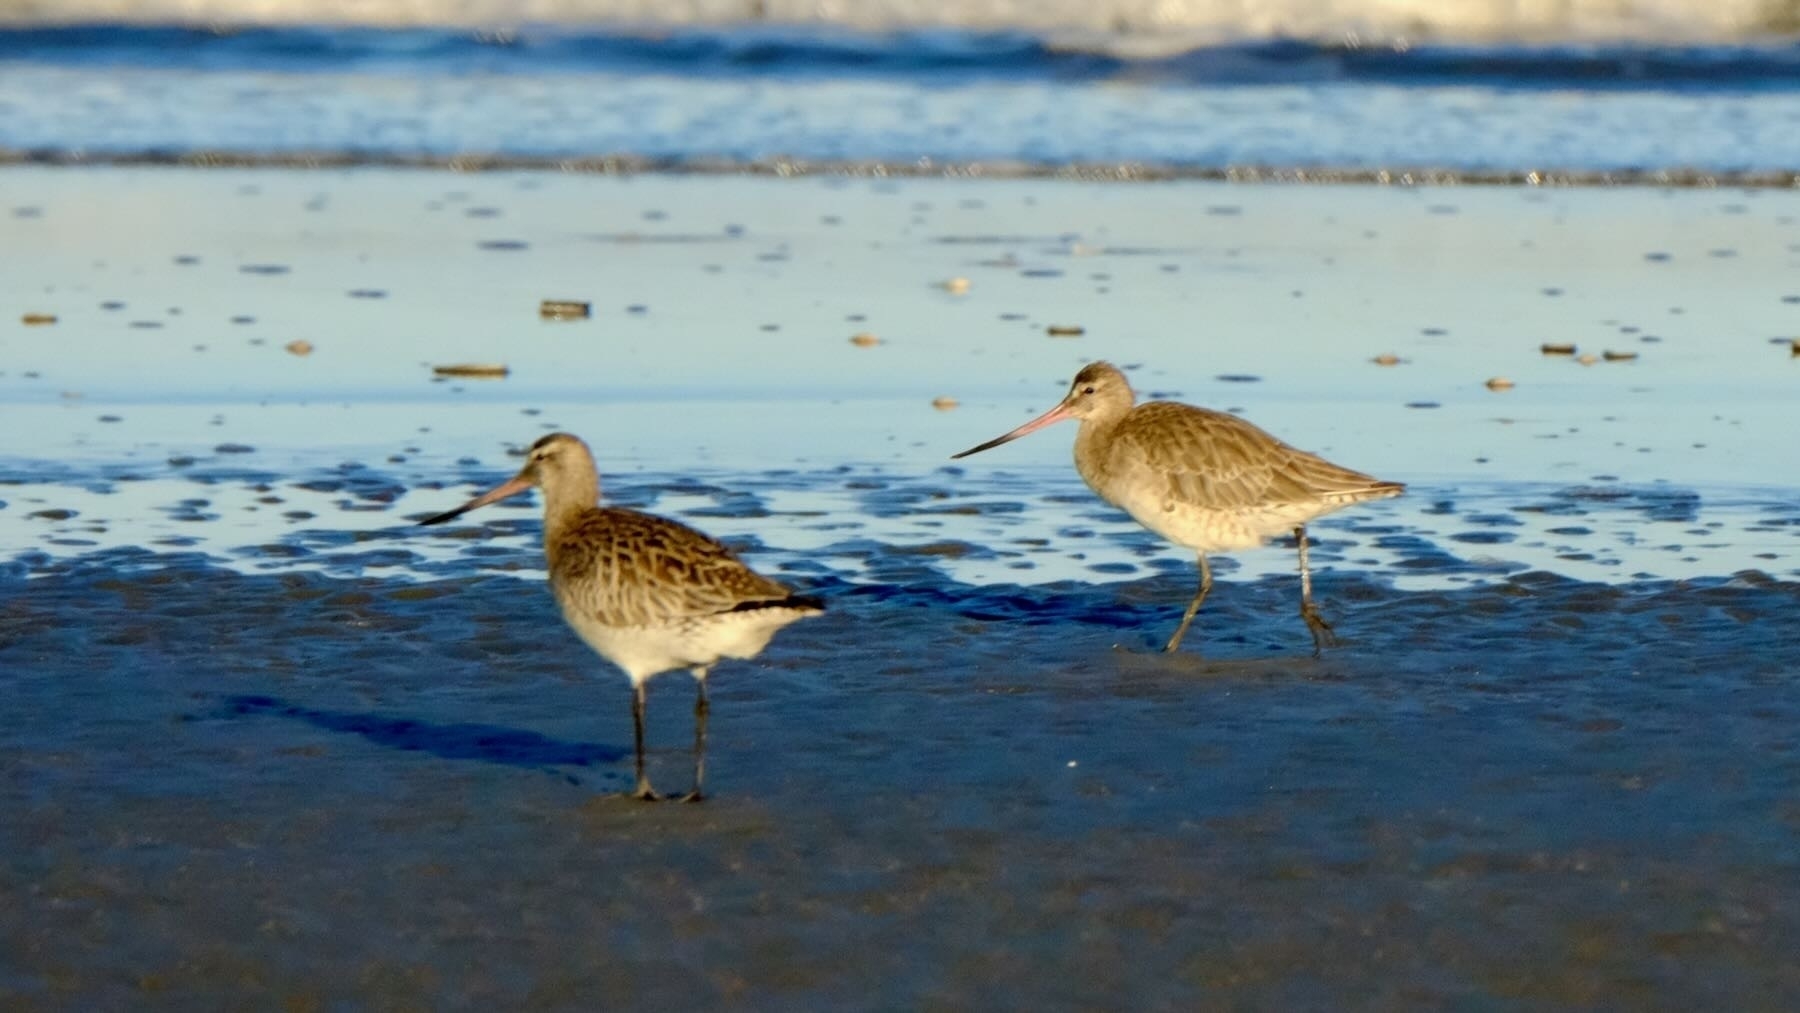 2 godwits on the wet sand at water's edge.  